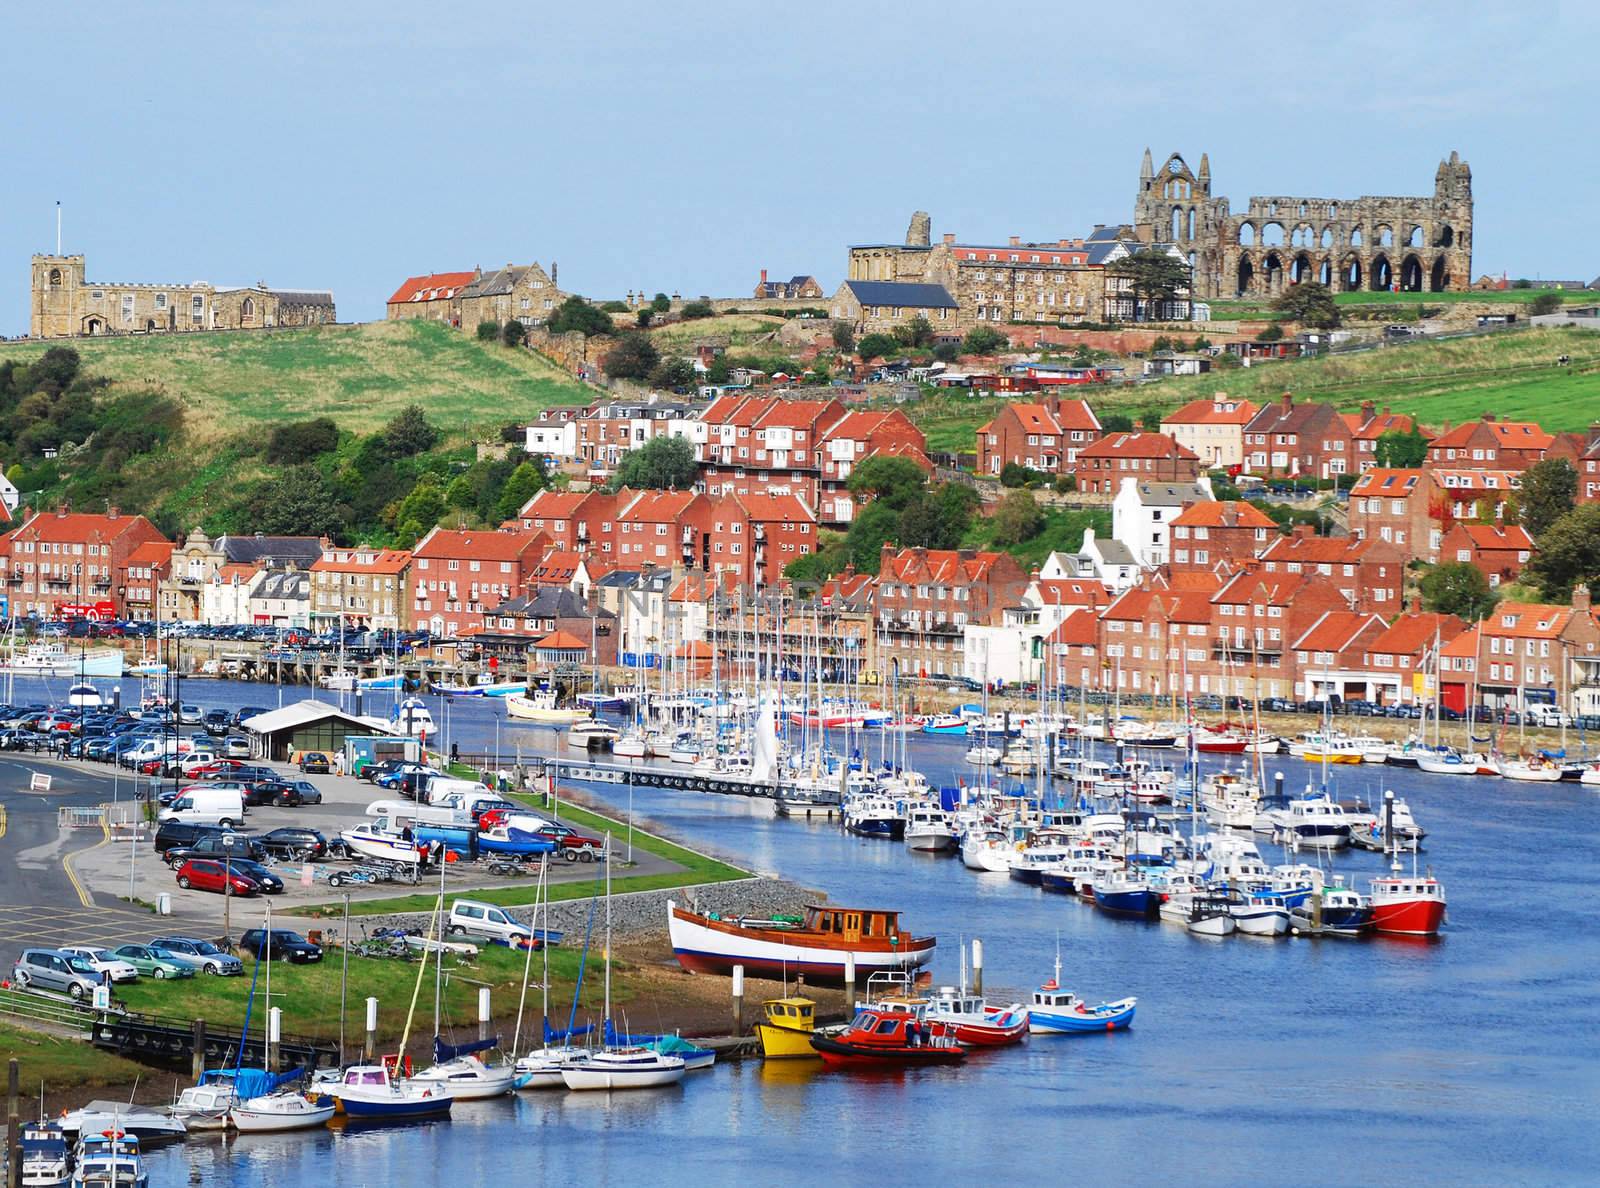 Picture postcard view of Whitby, North Yorkshire, UK.